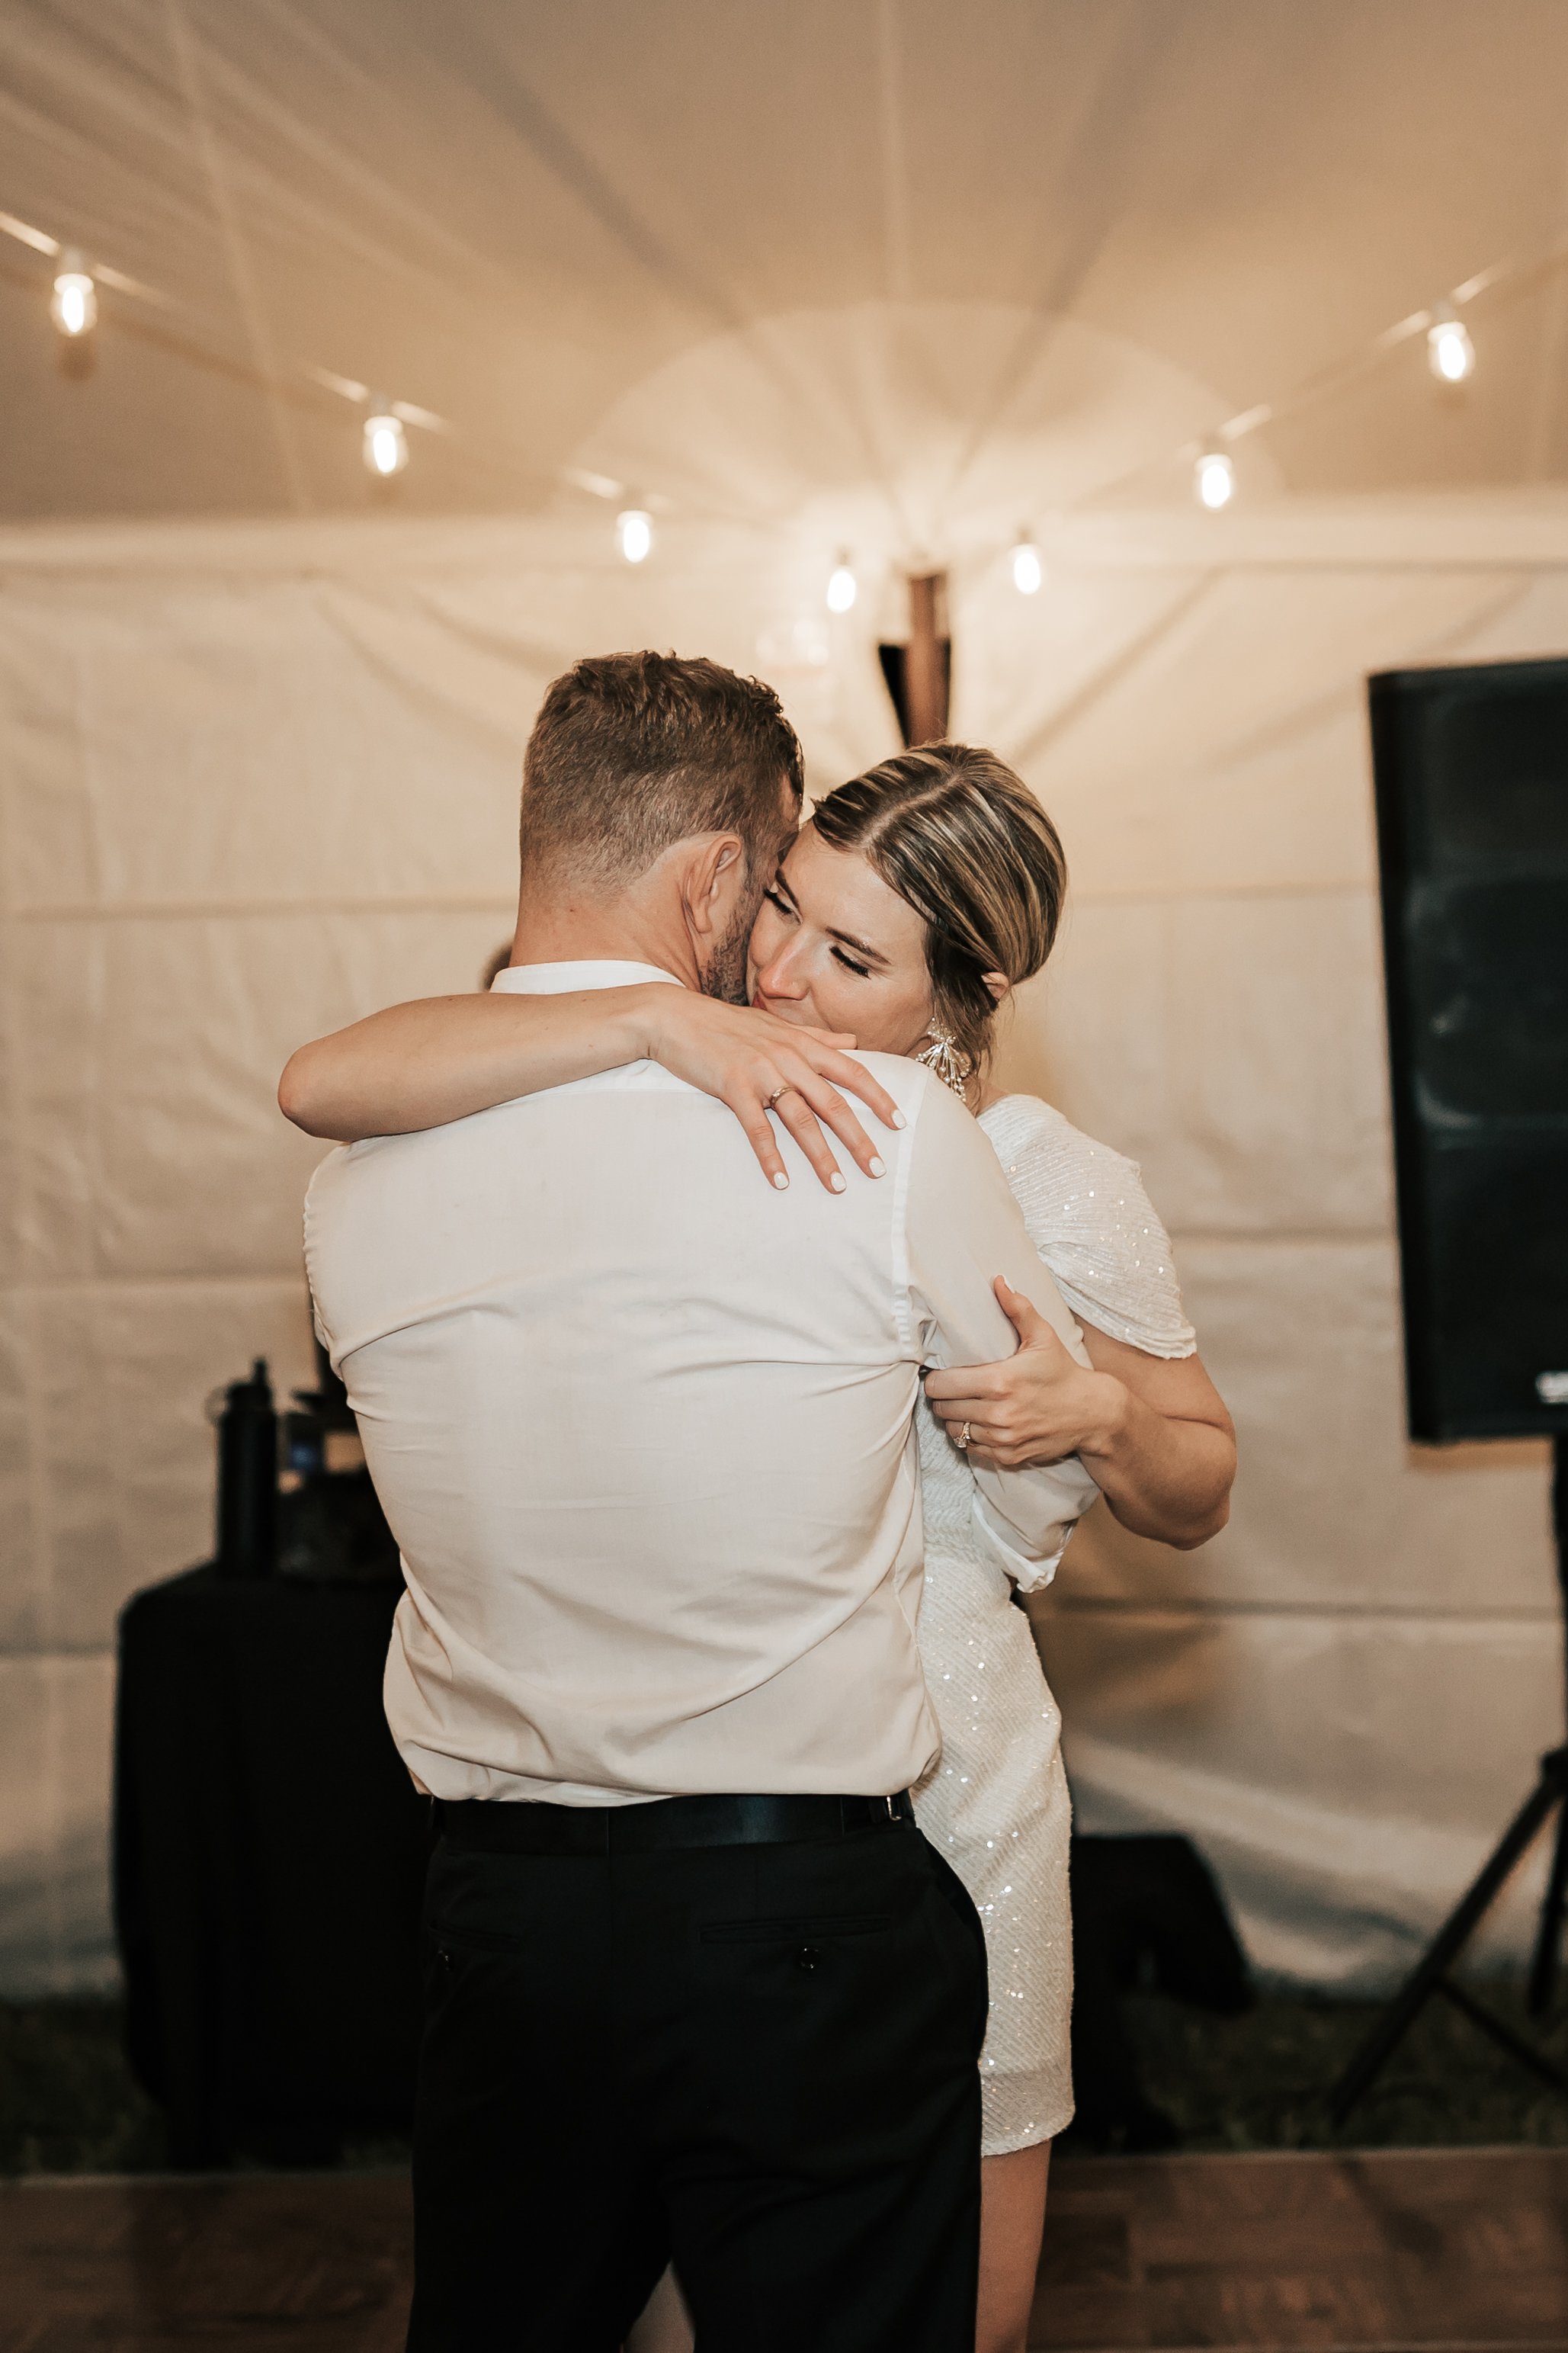  Bride and groom share a last dance together as reception ends. Bride and groom hug as they dance alone. Montana wedding photography.  